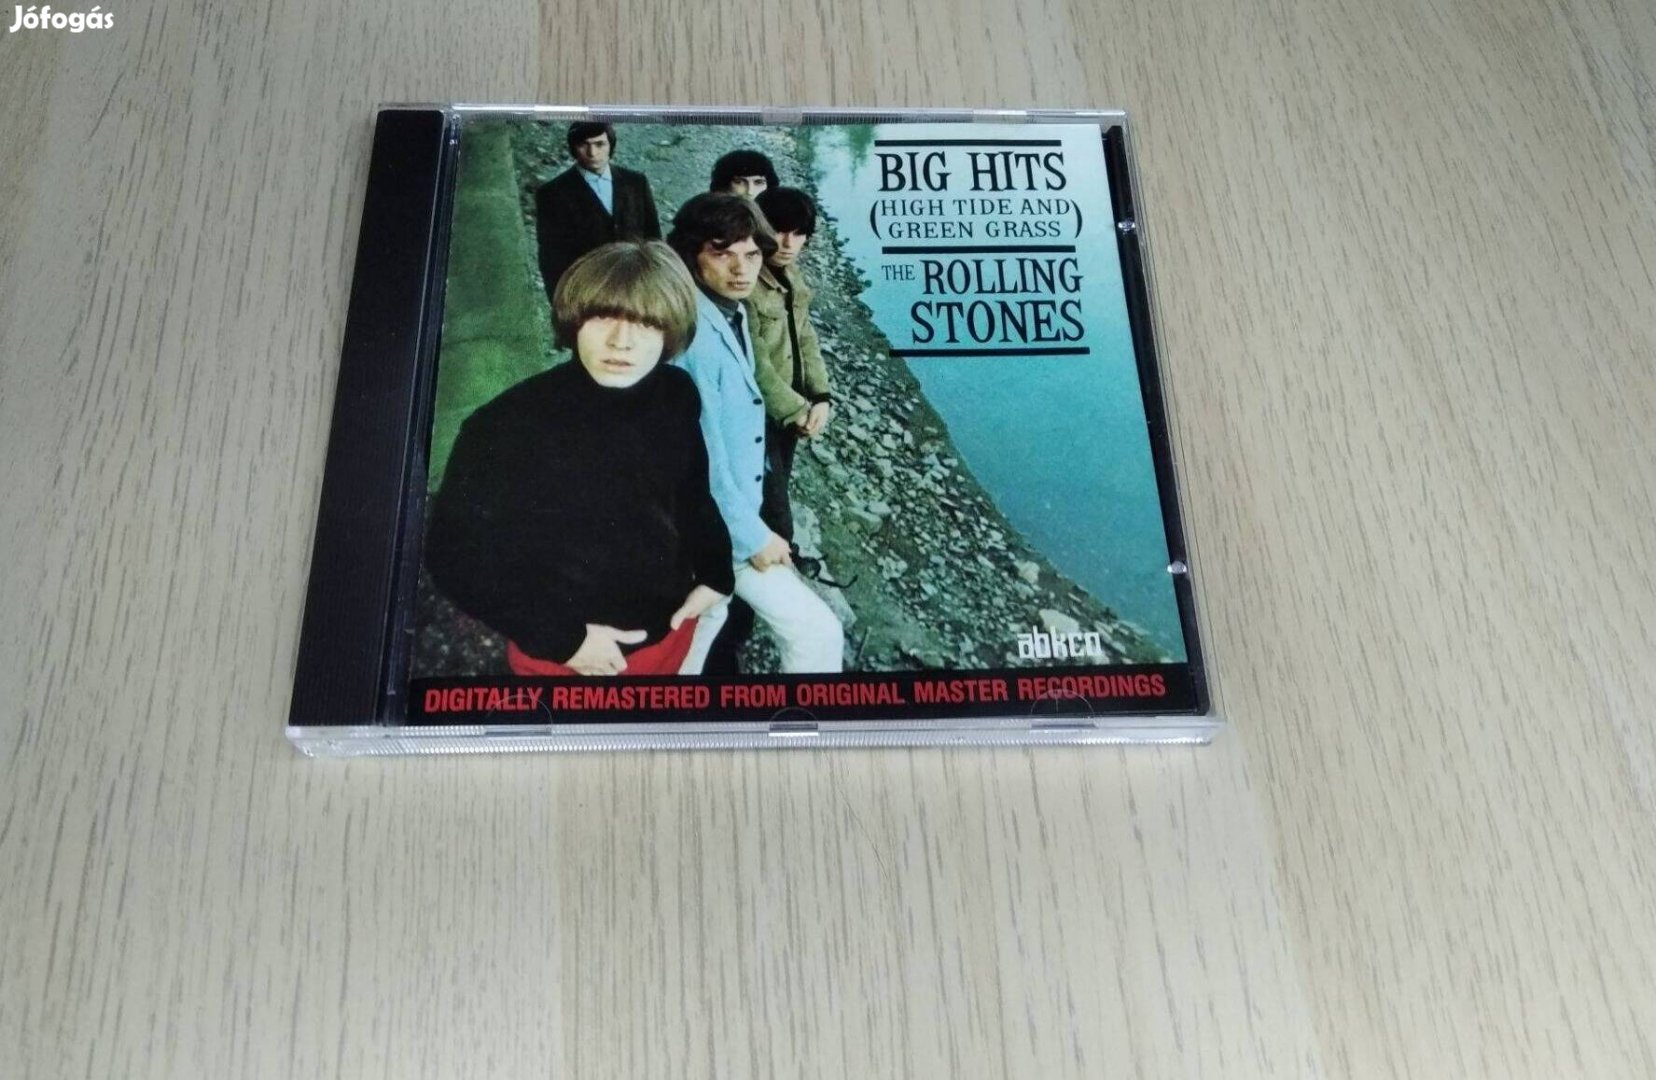 The Rolling Stones - Big Hits (High Tide And Green Grass) CD